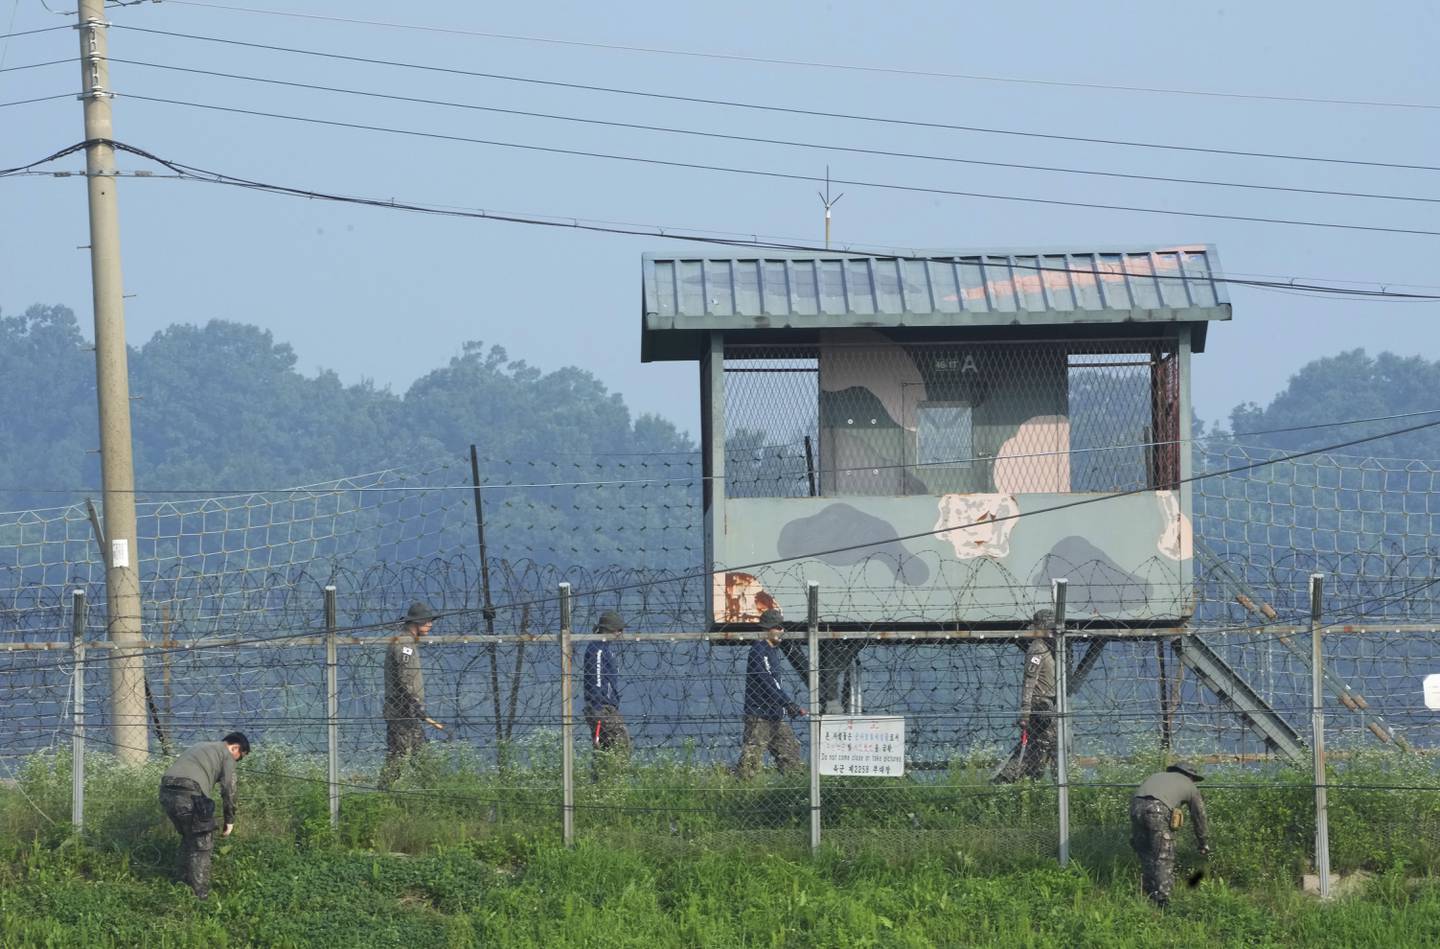 South Korean army soldiers work in font of a military guard post at the Imjingak Pavilion in in Paju, South Korea, near the border with North Korea, Friday, July 21, 2023.